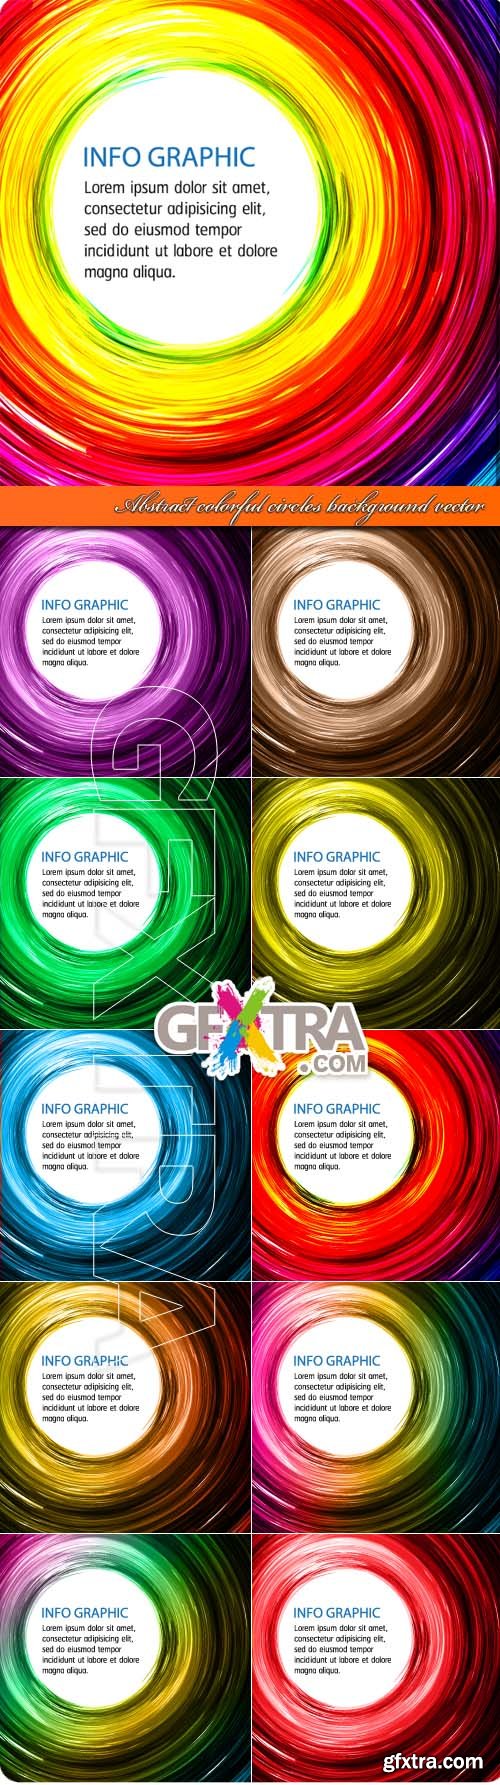 Abstract colorful circles background vector